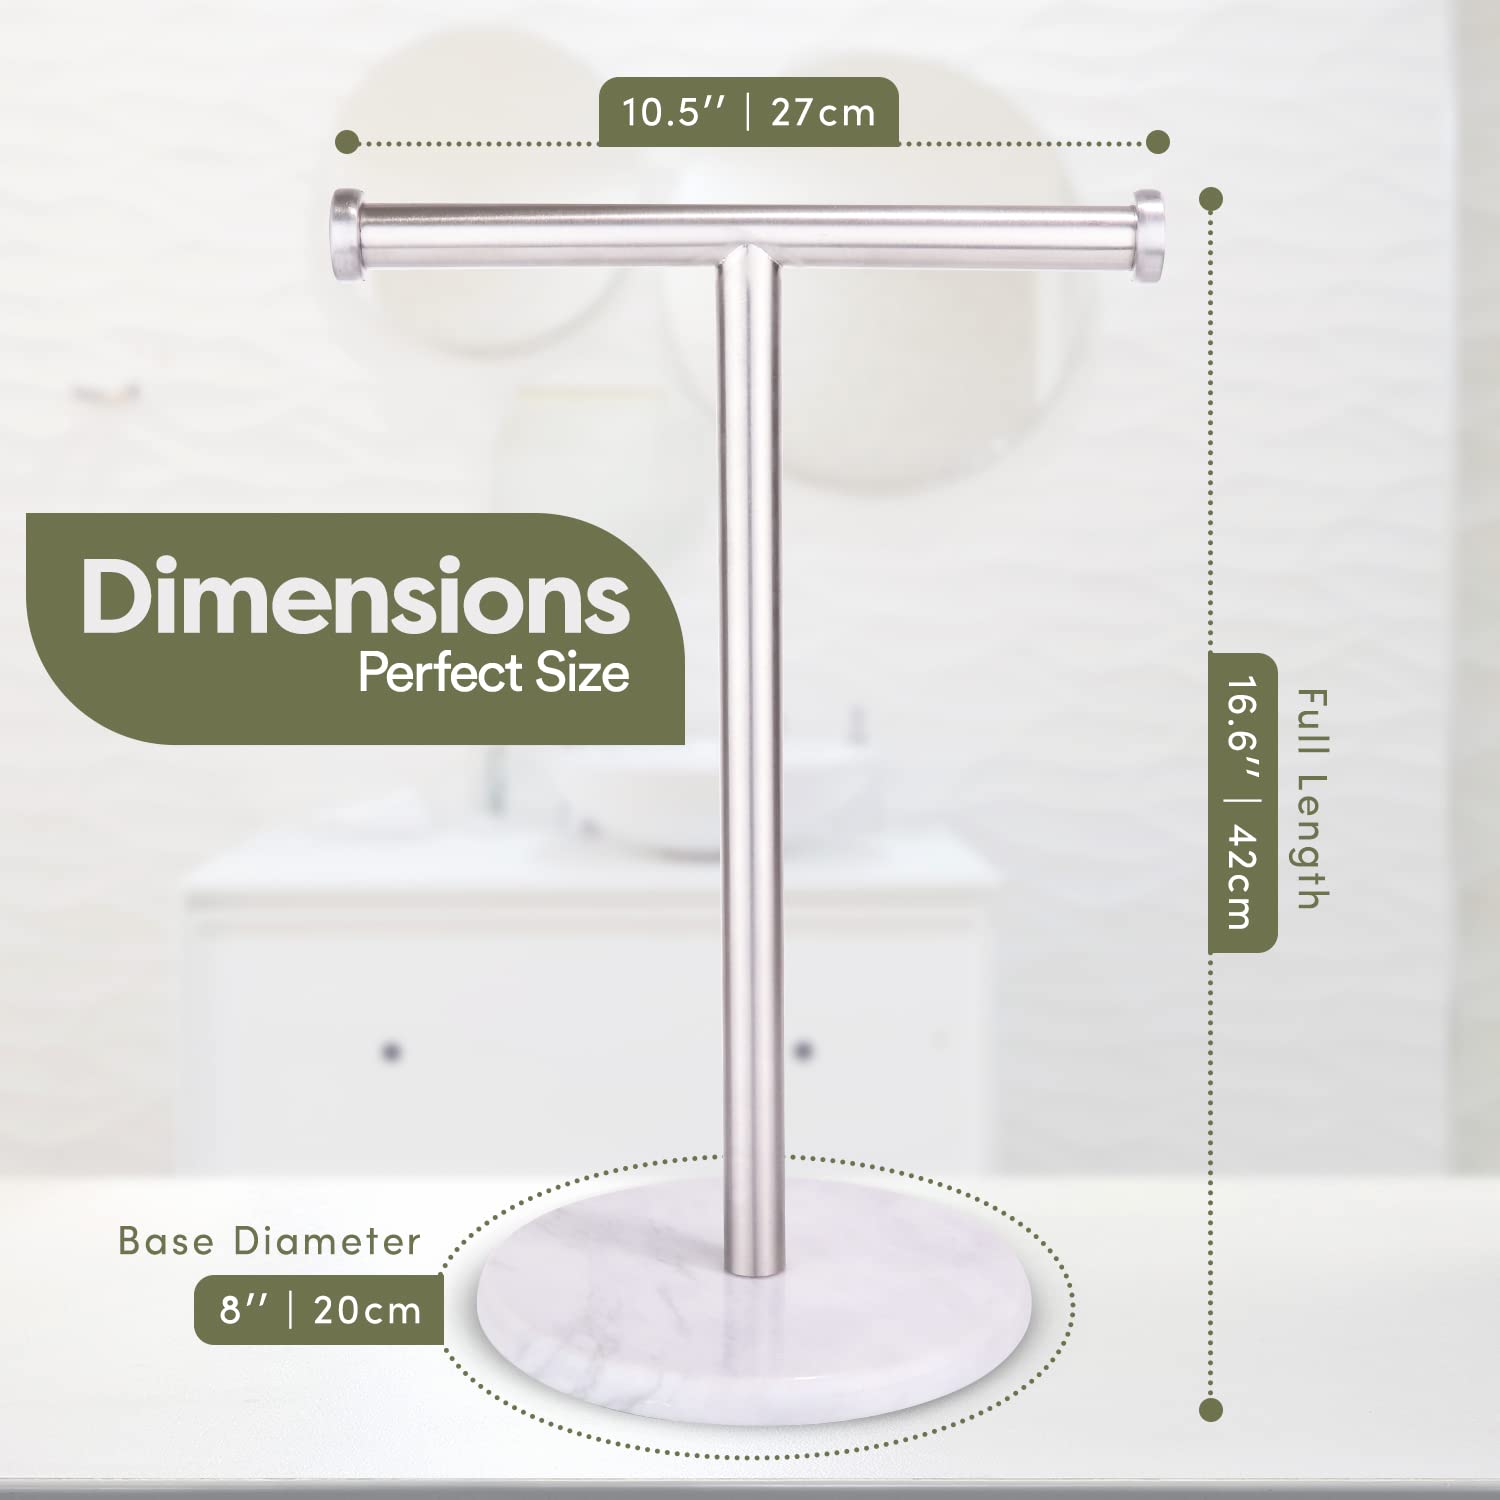 Homeries Marble Hand Towel Holder - Stainless Steel Towel Stand with Round Marble Base - Modern T-Shape Hand Towel Valet for Bathroom, Vanity Top Towel Stand, Counter Towel Bar, Jewelry Rack  - Acceptable